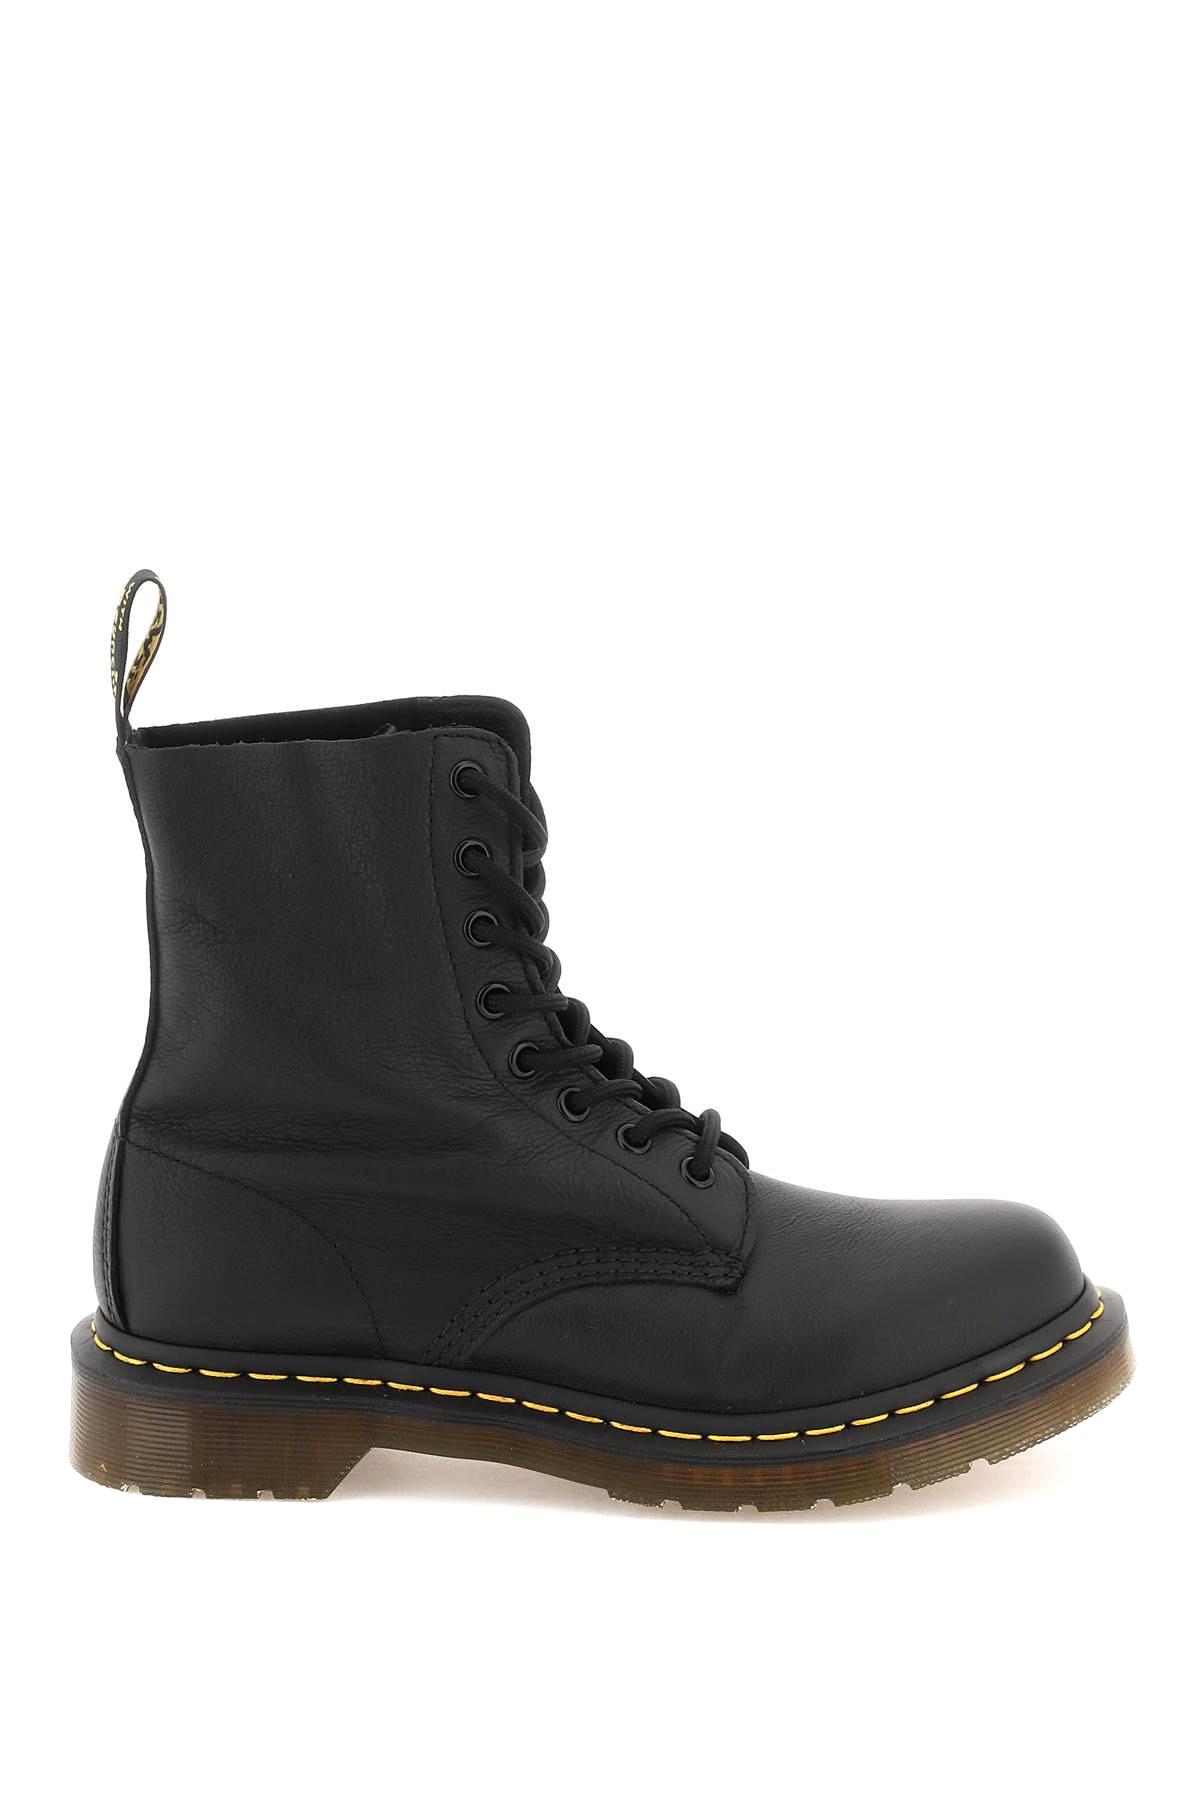 Dr. Martens Dr.martens 1460 Pascal Virginia Lace-up Combat Boots in Black |  Lyst